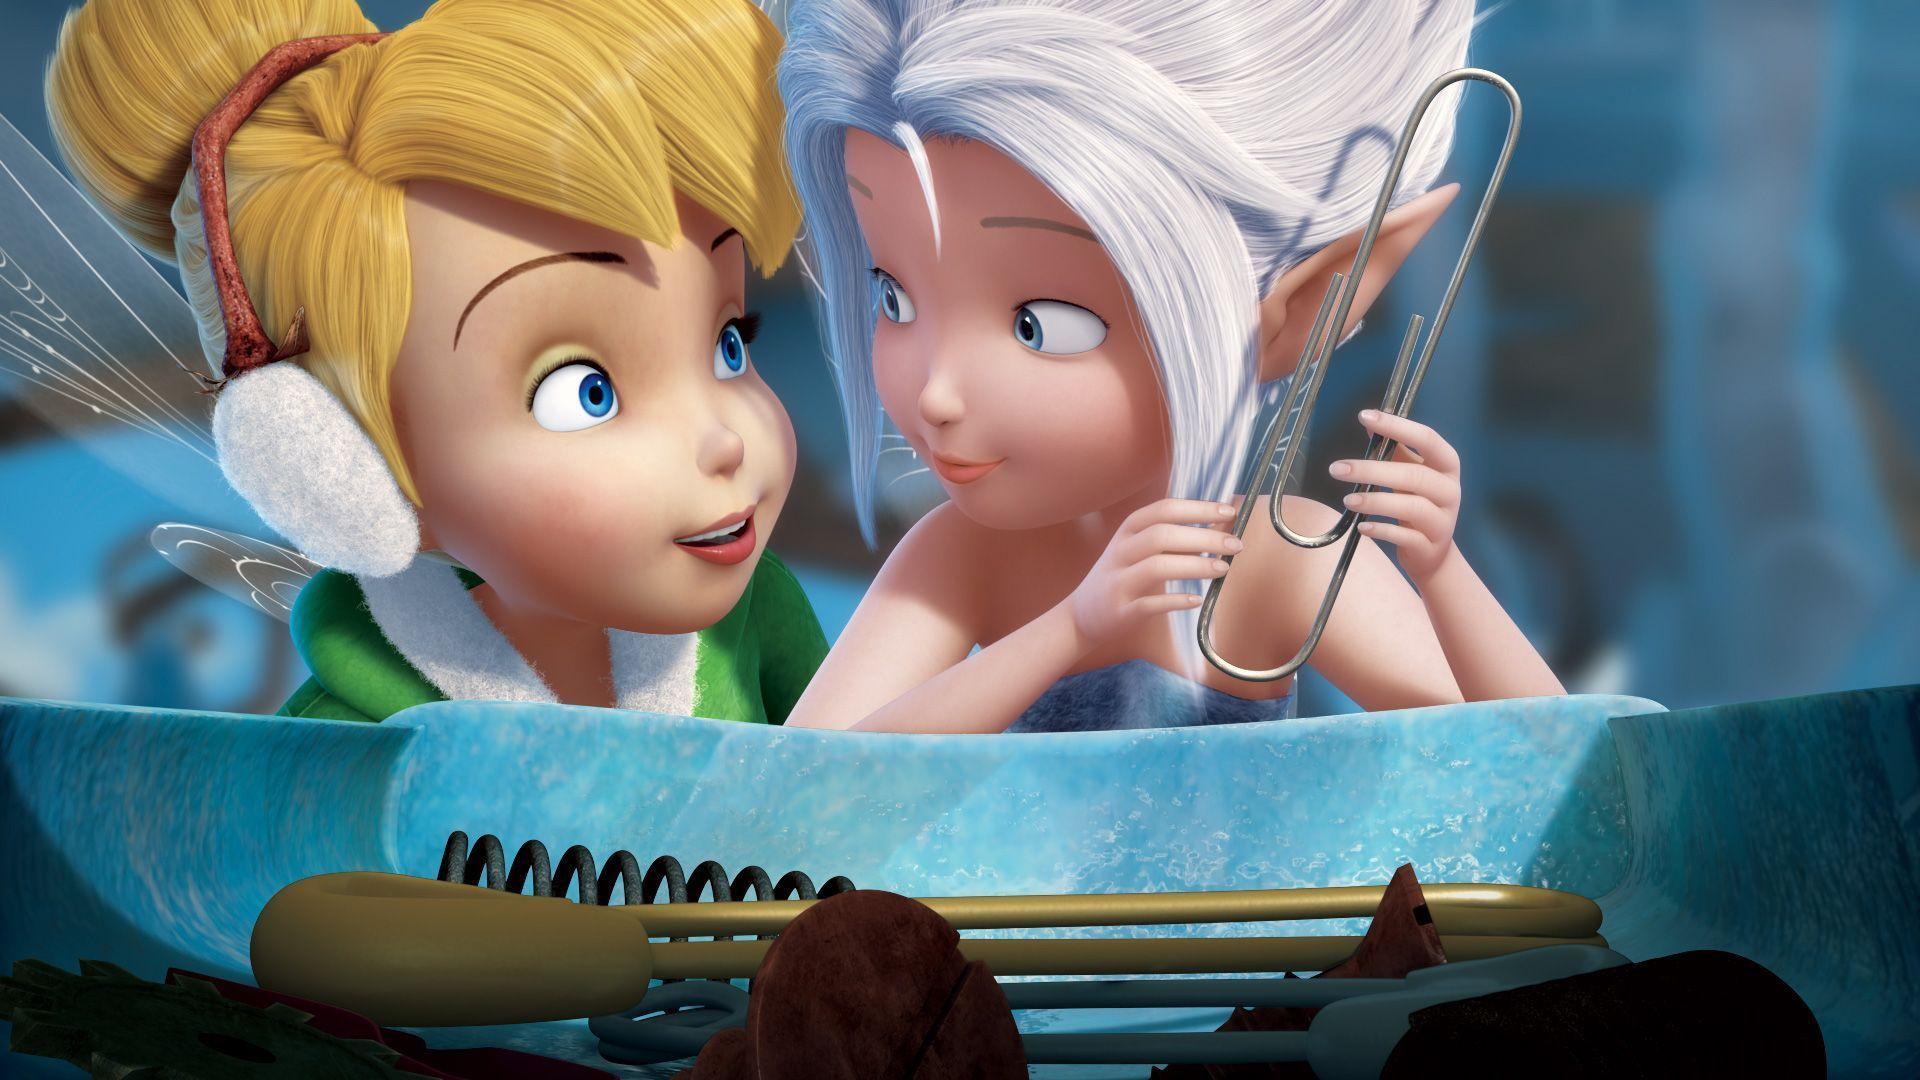 tinker bell secret of the wings new movie wallpapers